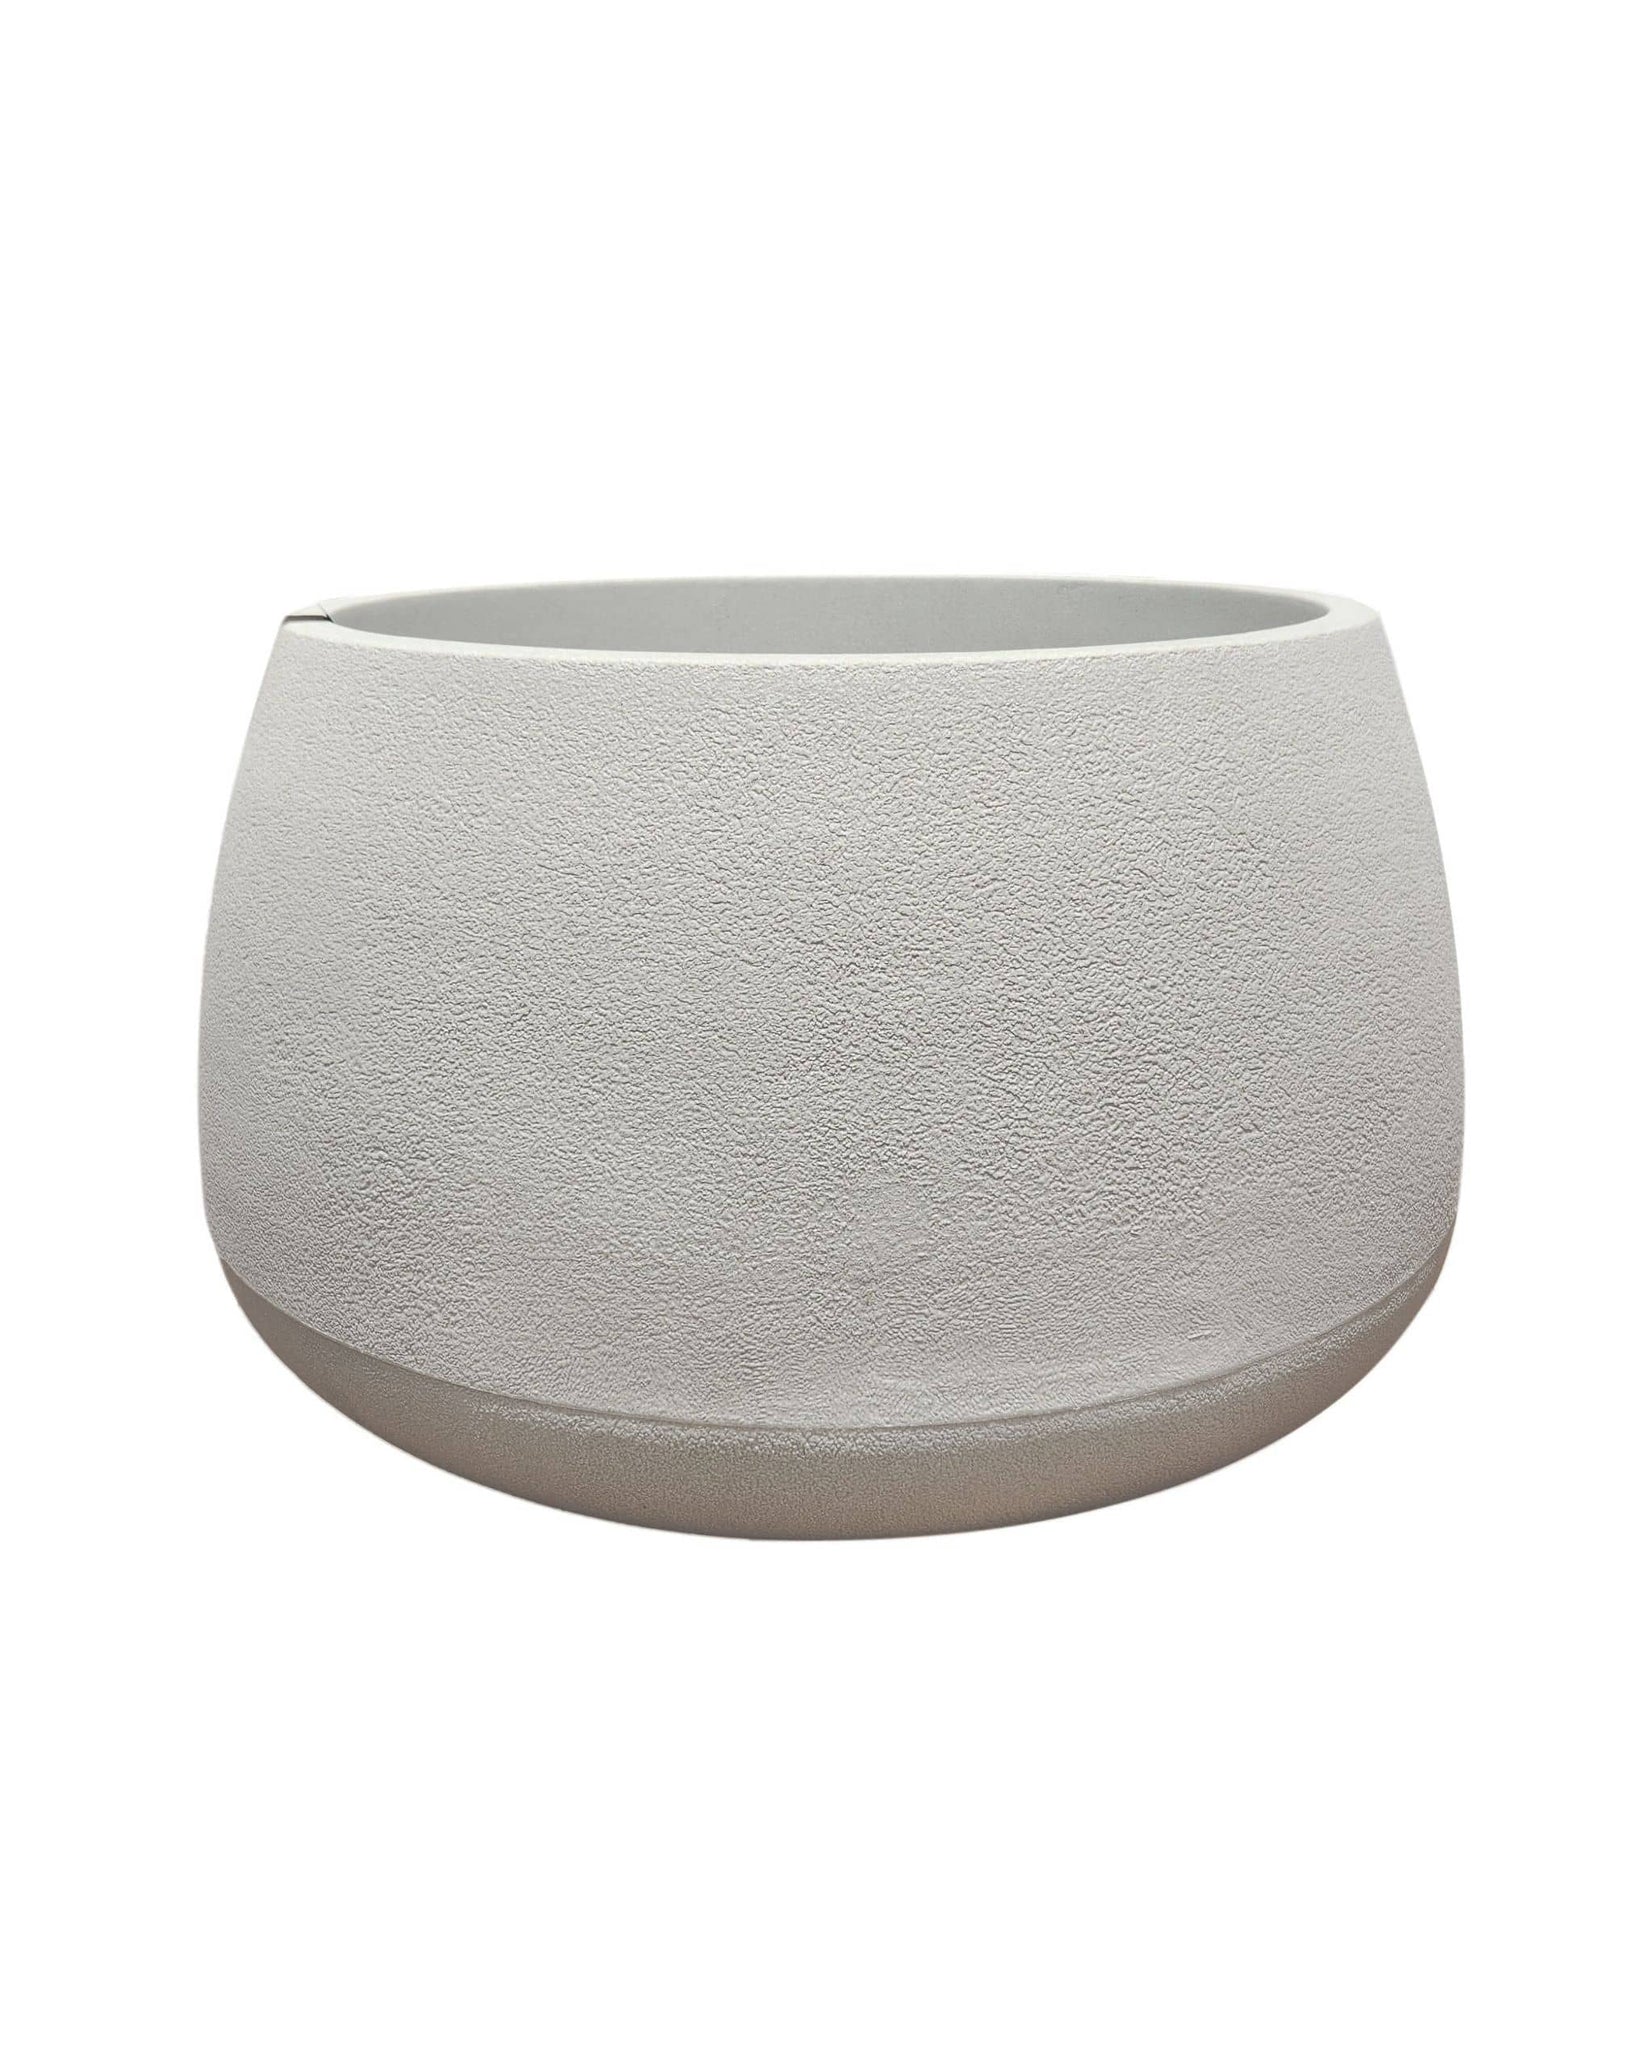 Bios Low Japi Planter. Sandstone colour, Low rise modern contemporary plant pot with stunning slightly textured finish, and wide neck for planting. Florastyle by Hingham.